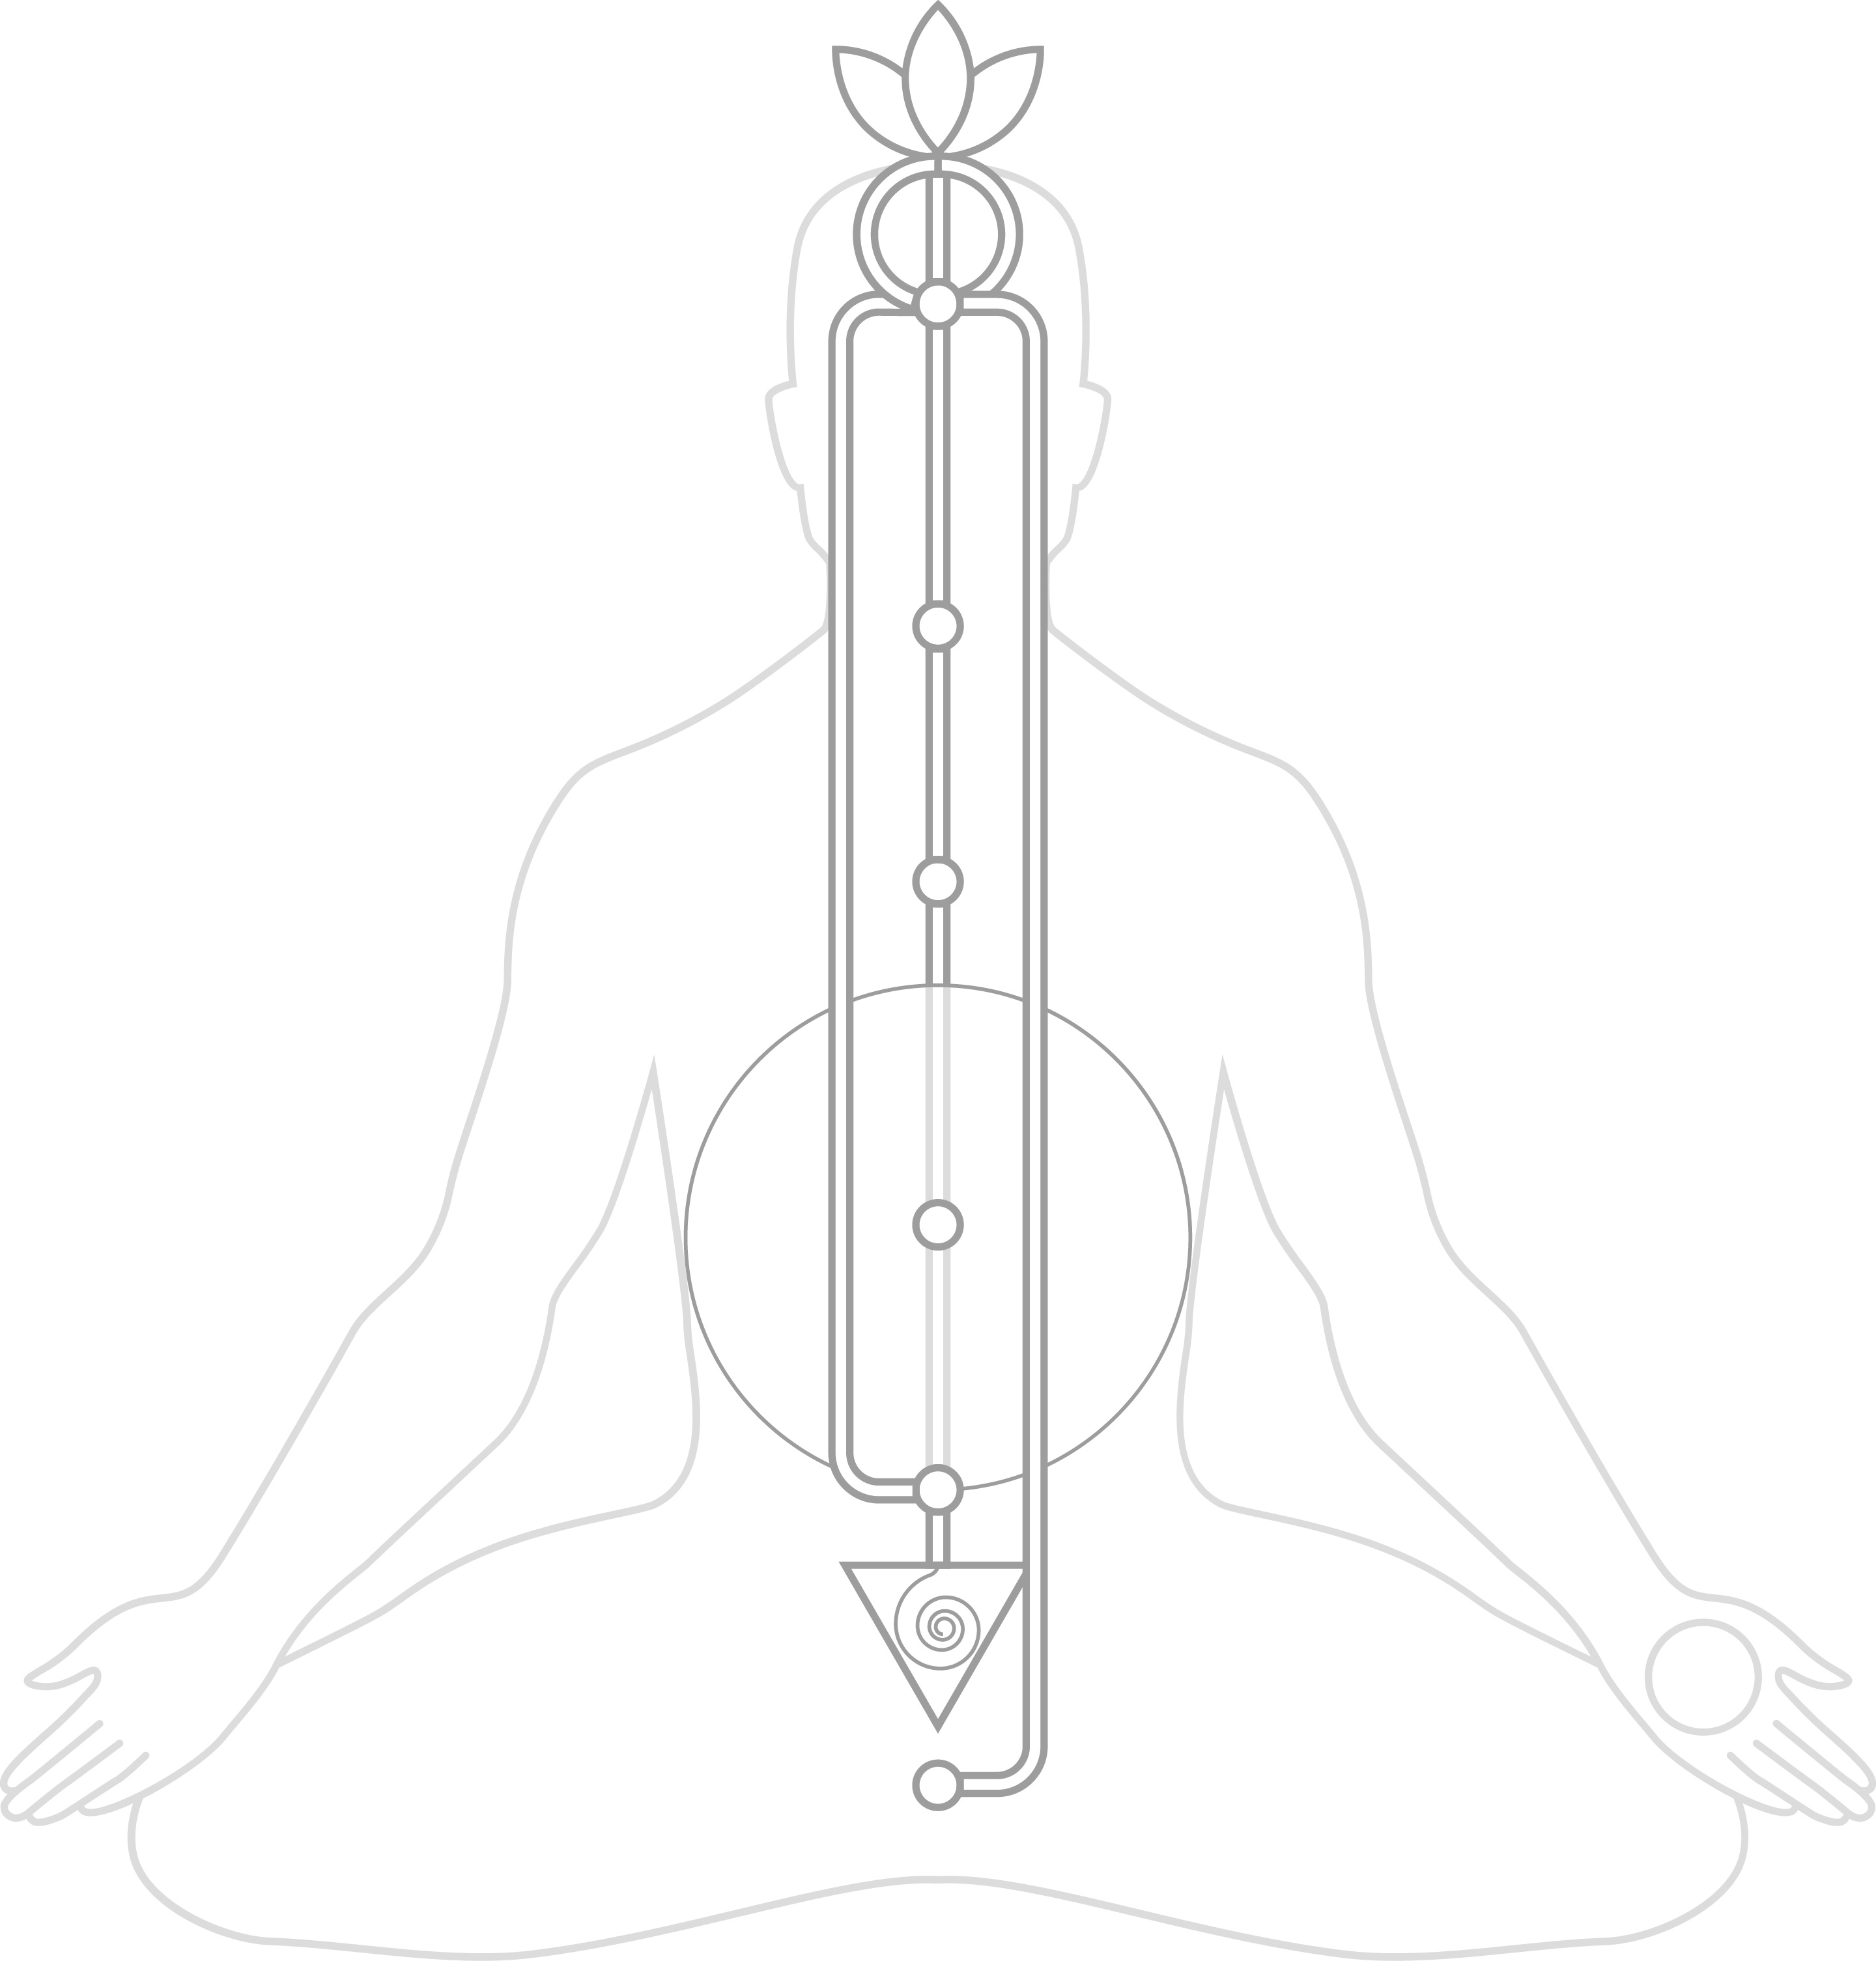 Diagram of the subtle body: An outline of a man sitting in meditation with three vertical lines along the spine representing the left, right and central channels. Along the central line there are six energy centres shown as circles and the seventh centre is depicted as a lotus on the top of the head.